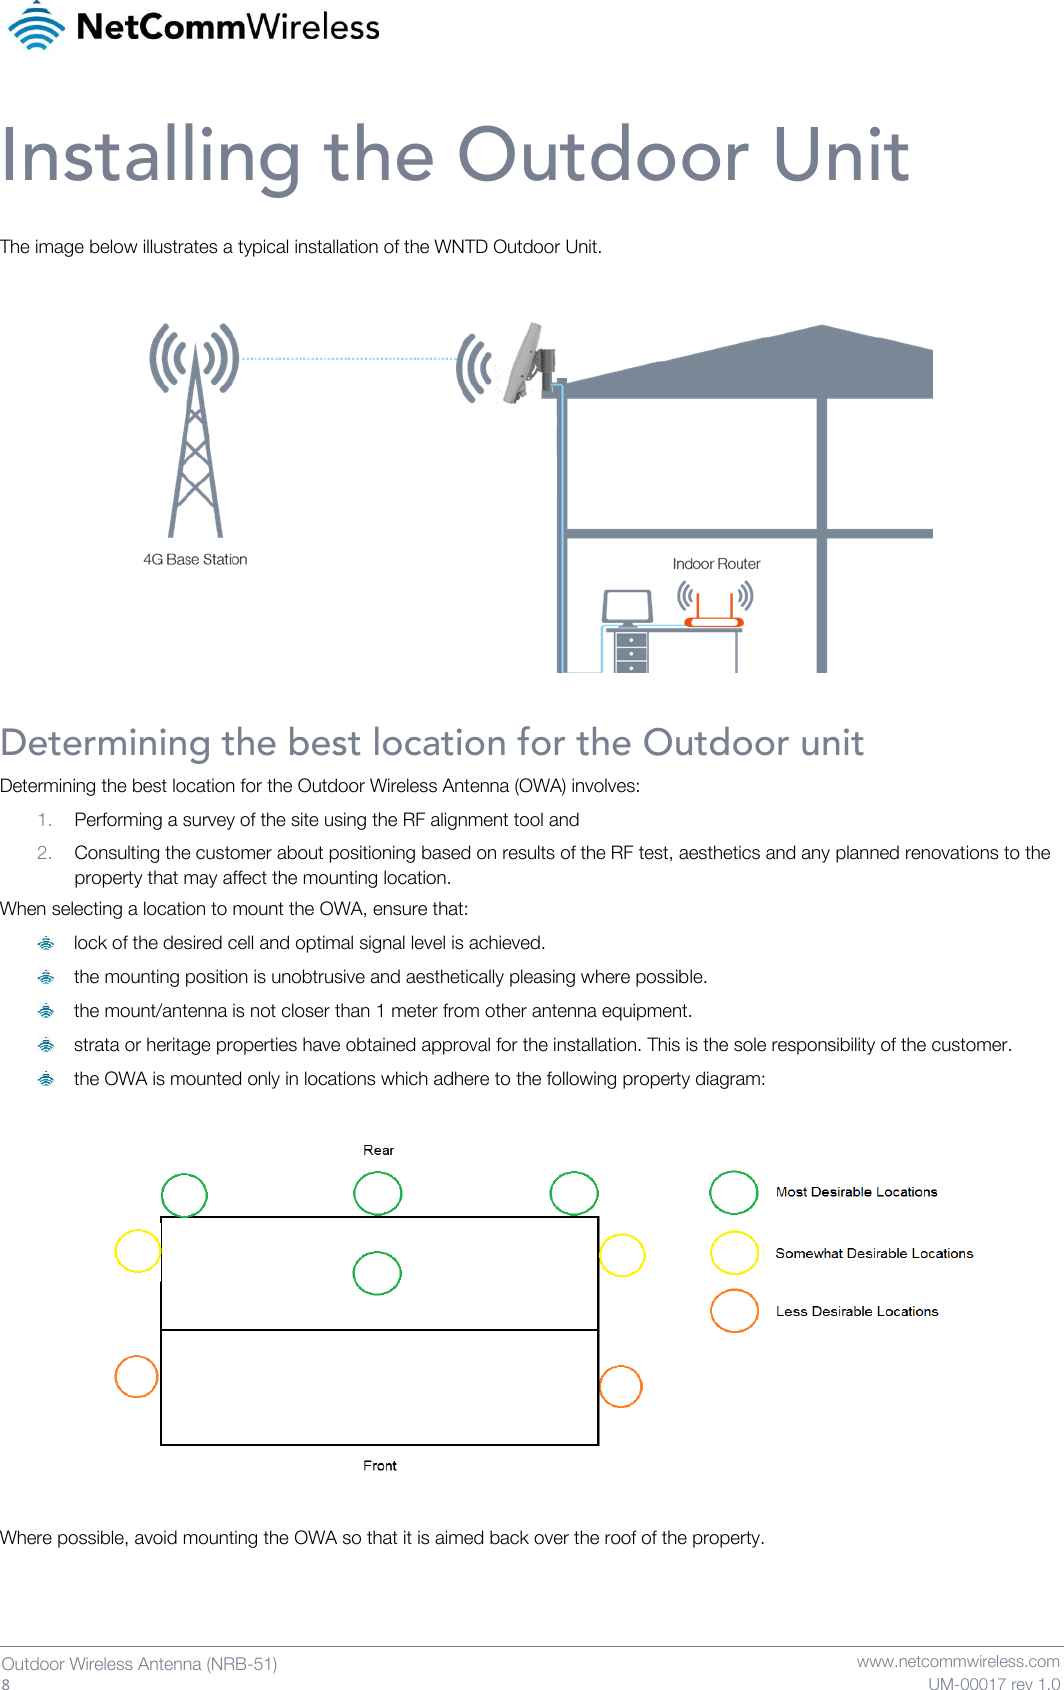   8  Outdoor Wireless Antenna (NRB-51)   www.netcommwireless.com UM-00017 rev 1.0 Installing the Outdoor Unit The image below illustrates a typical installation of the WNTD Outdoor Unit.  Determining the best location for the Outdoor unit Determining the best location for the Outdoor Wireless Antenna (OWA) involves: 1. Performing a survey of the site using the RF alignment tool and  2. Consulting the customer about positioning based on results of the RF test, aesthetics and any planned renovations to the property that may affect the mounting location. When selecting a location to mount the OWA, ensure that:  lock of the desired cell and optimal signal level is achieved.  the mounting position is unobtrusive and aesthetically pleasing where possible.  the mount/antenna is not closer than 1 meter from other antenna equipment.  strata or heritage properties have obtained approval for the installation. This is the sole responsibility of the customer.  the OWA is mounted only in locations which adhere to the following property diagram:    Where possible, avoid mounting the OWA so that it is aimed back over the roof of the property.   